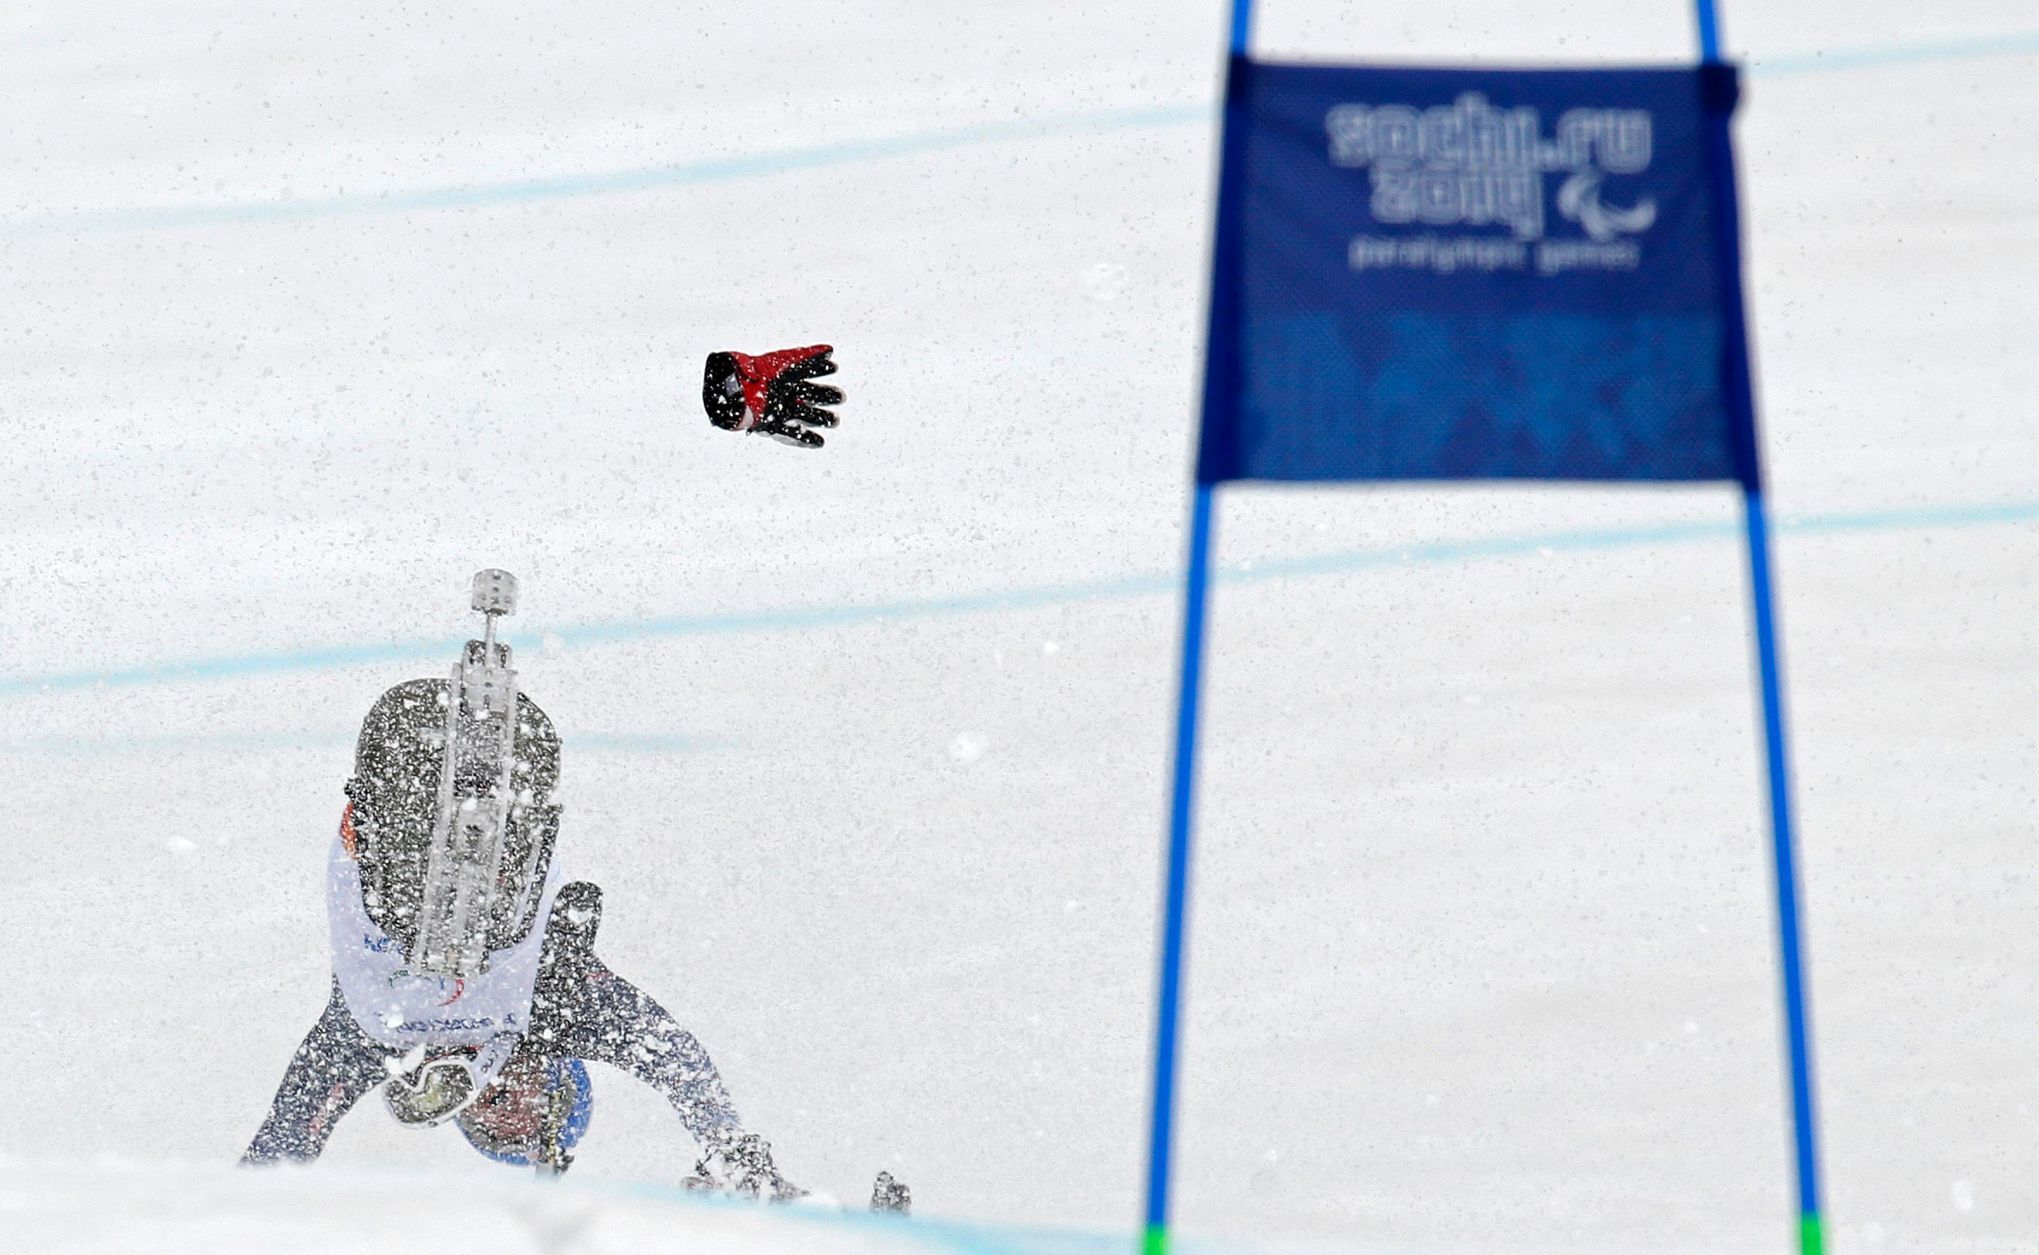 Tyler Walker of the U.S. crashes as he takes a jump during the men's sitting skiing downhill at the 2014 Sochi Paralympic Winter Games at the Rosa Khutor Alpine Center